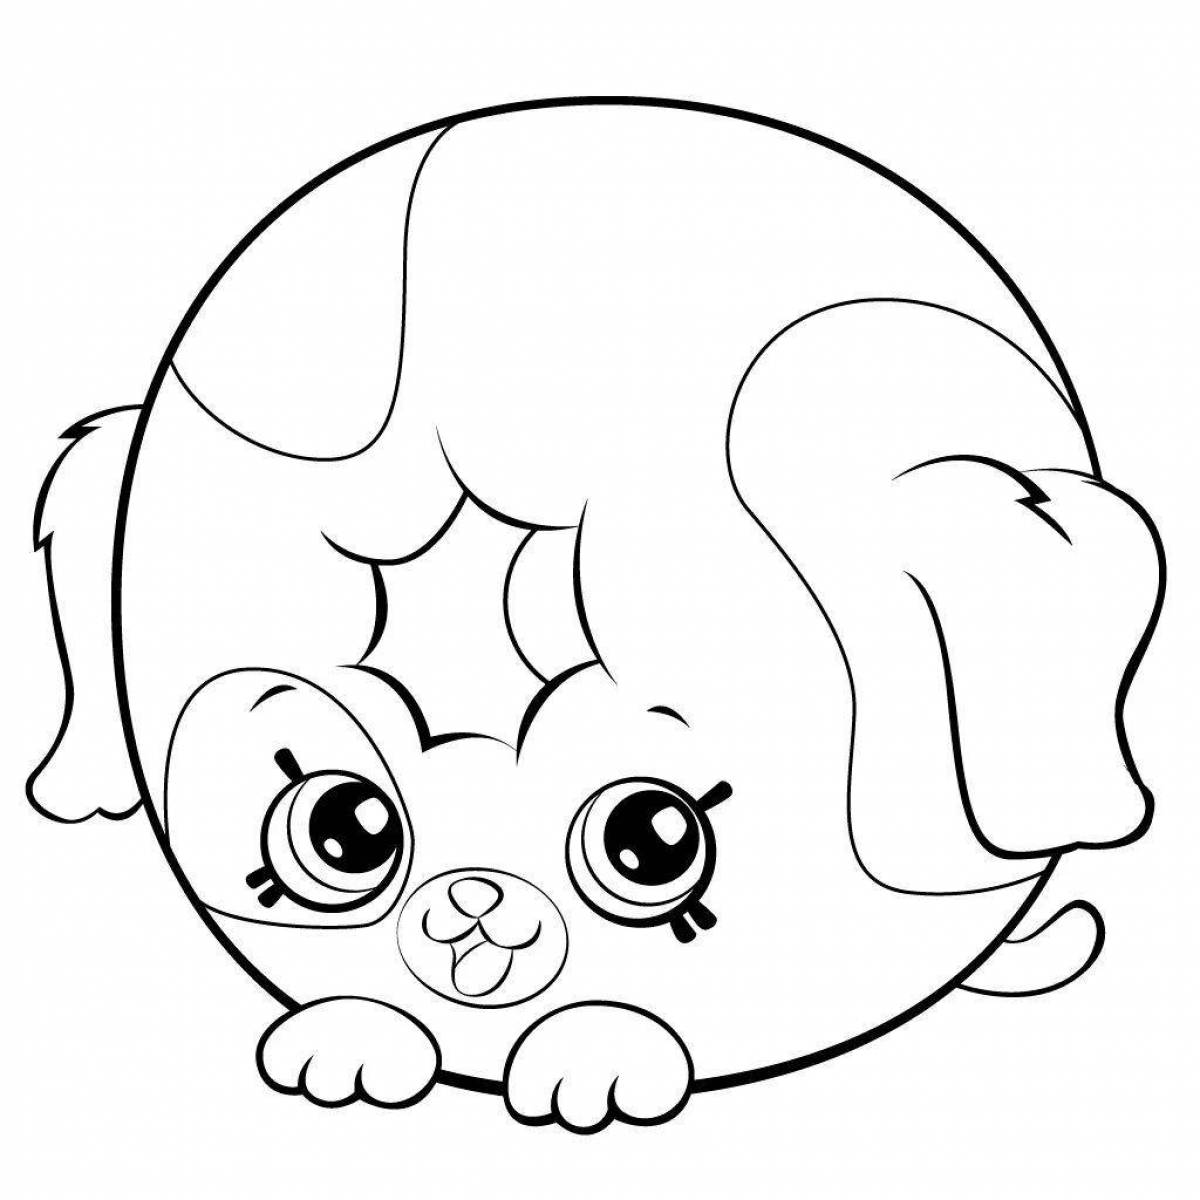 Cute and happy pet coloring pages